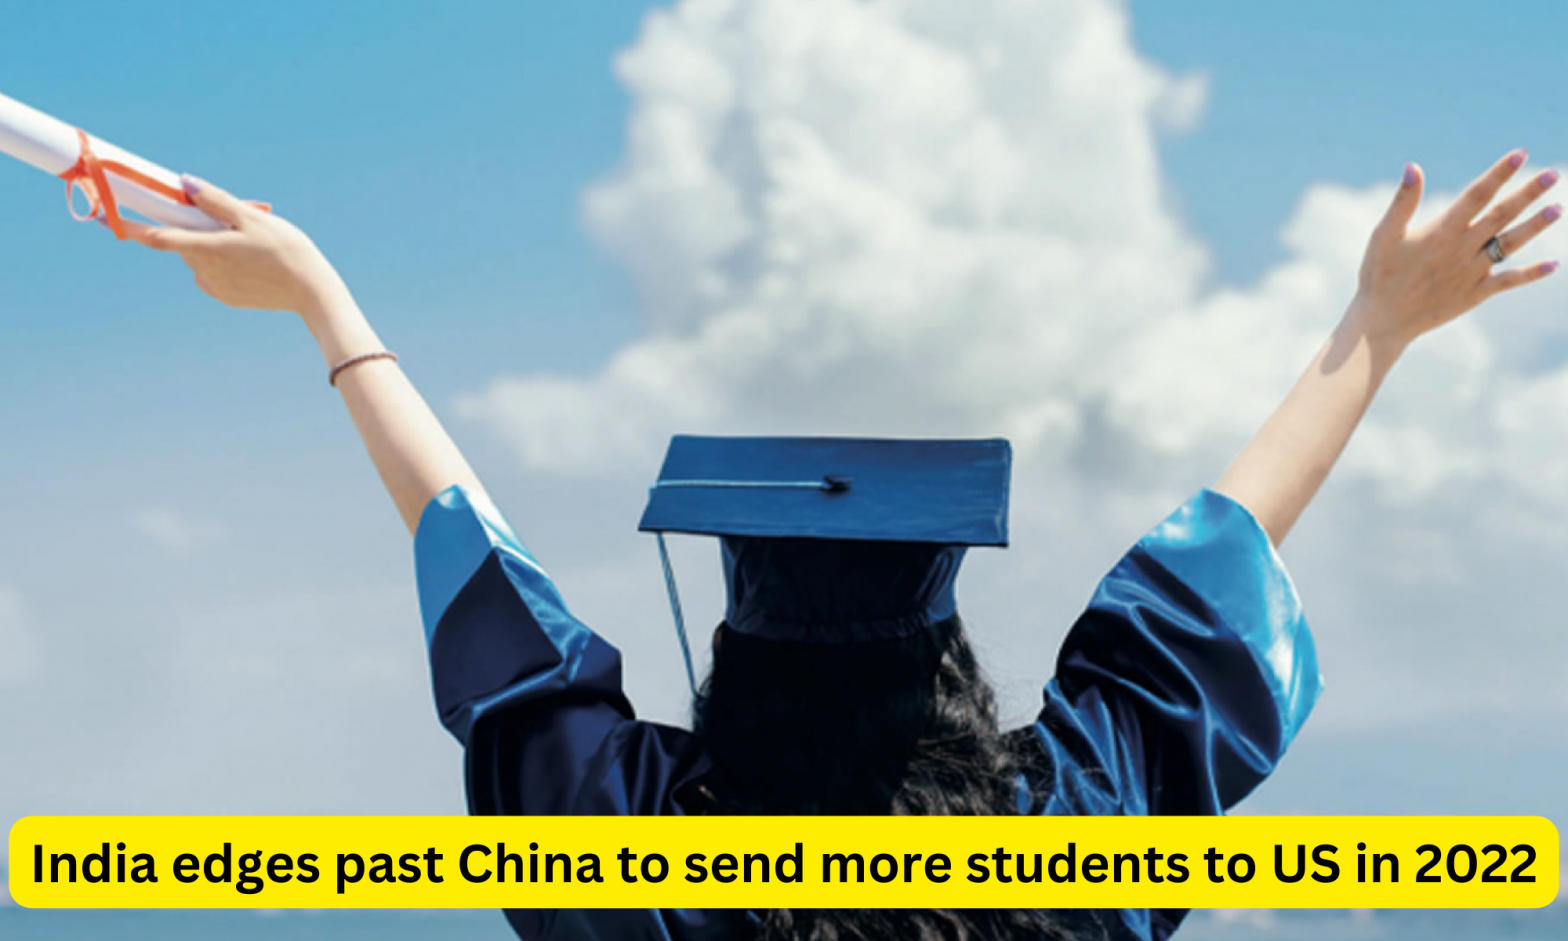 India edges past China to send more students to US in 2022